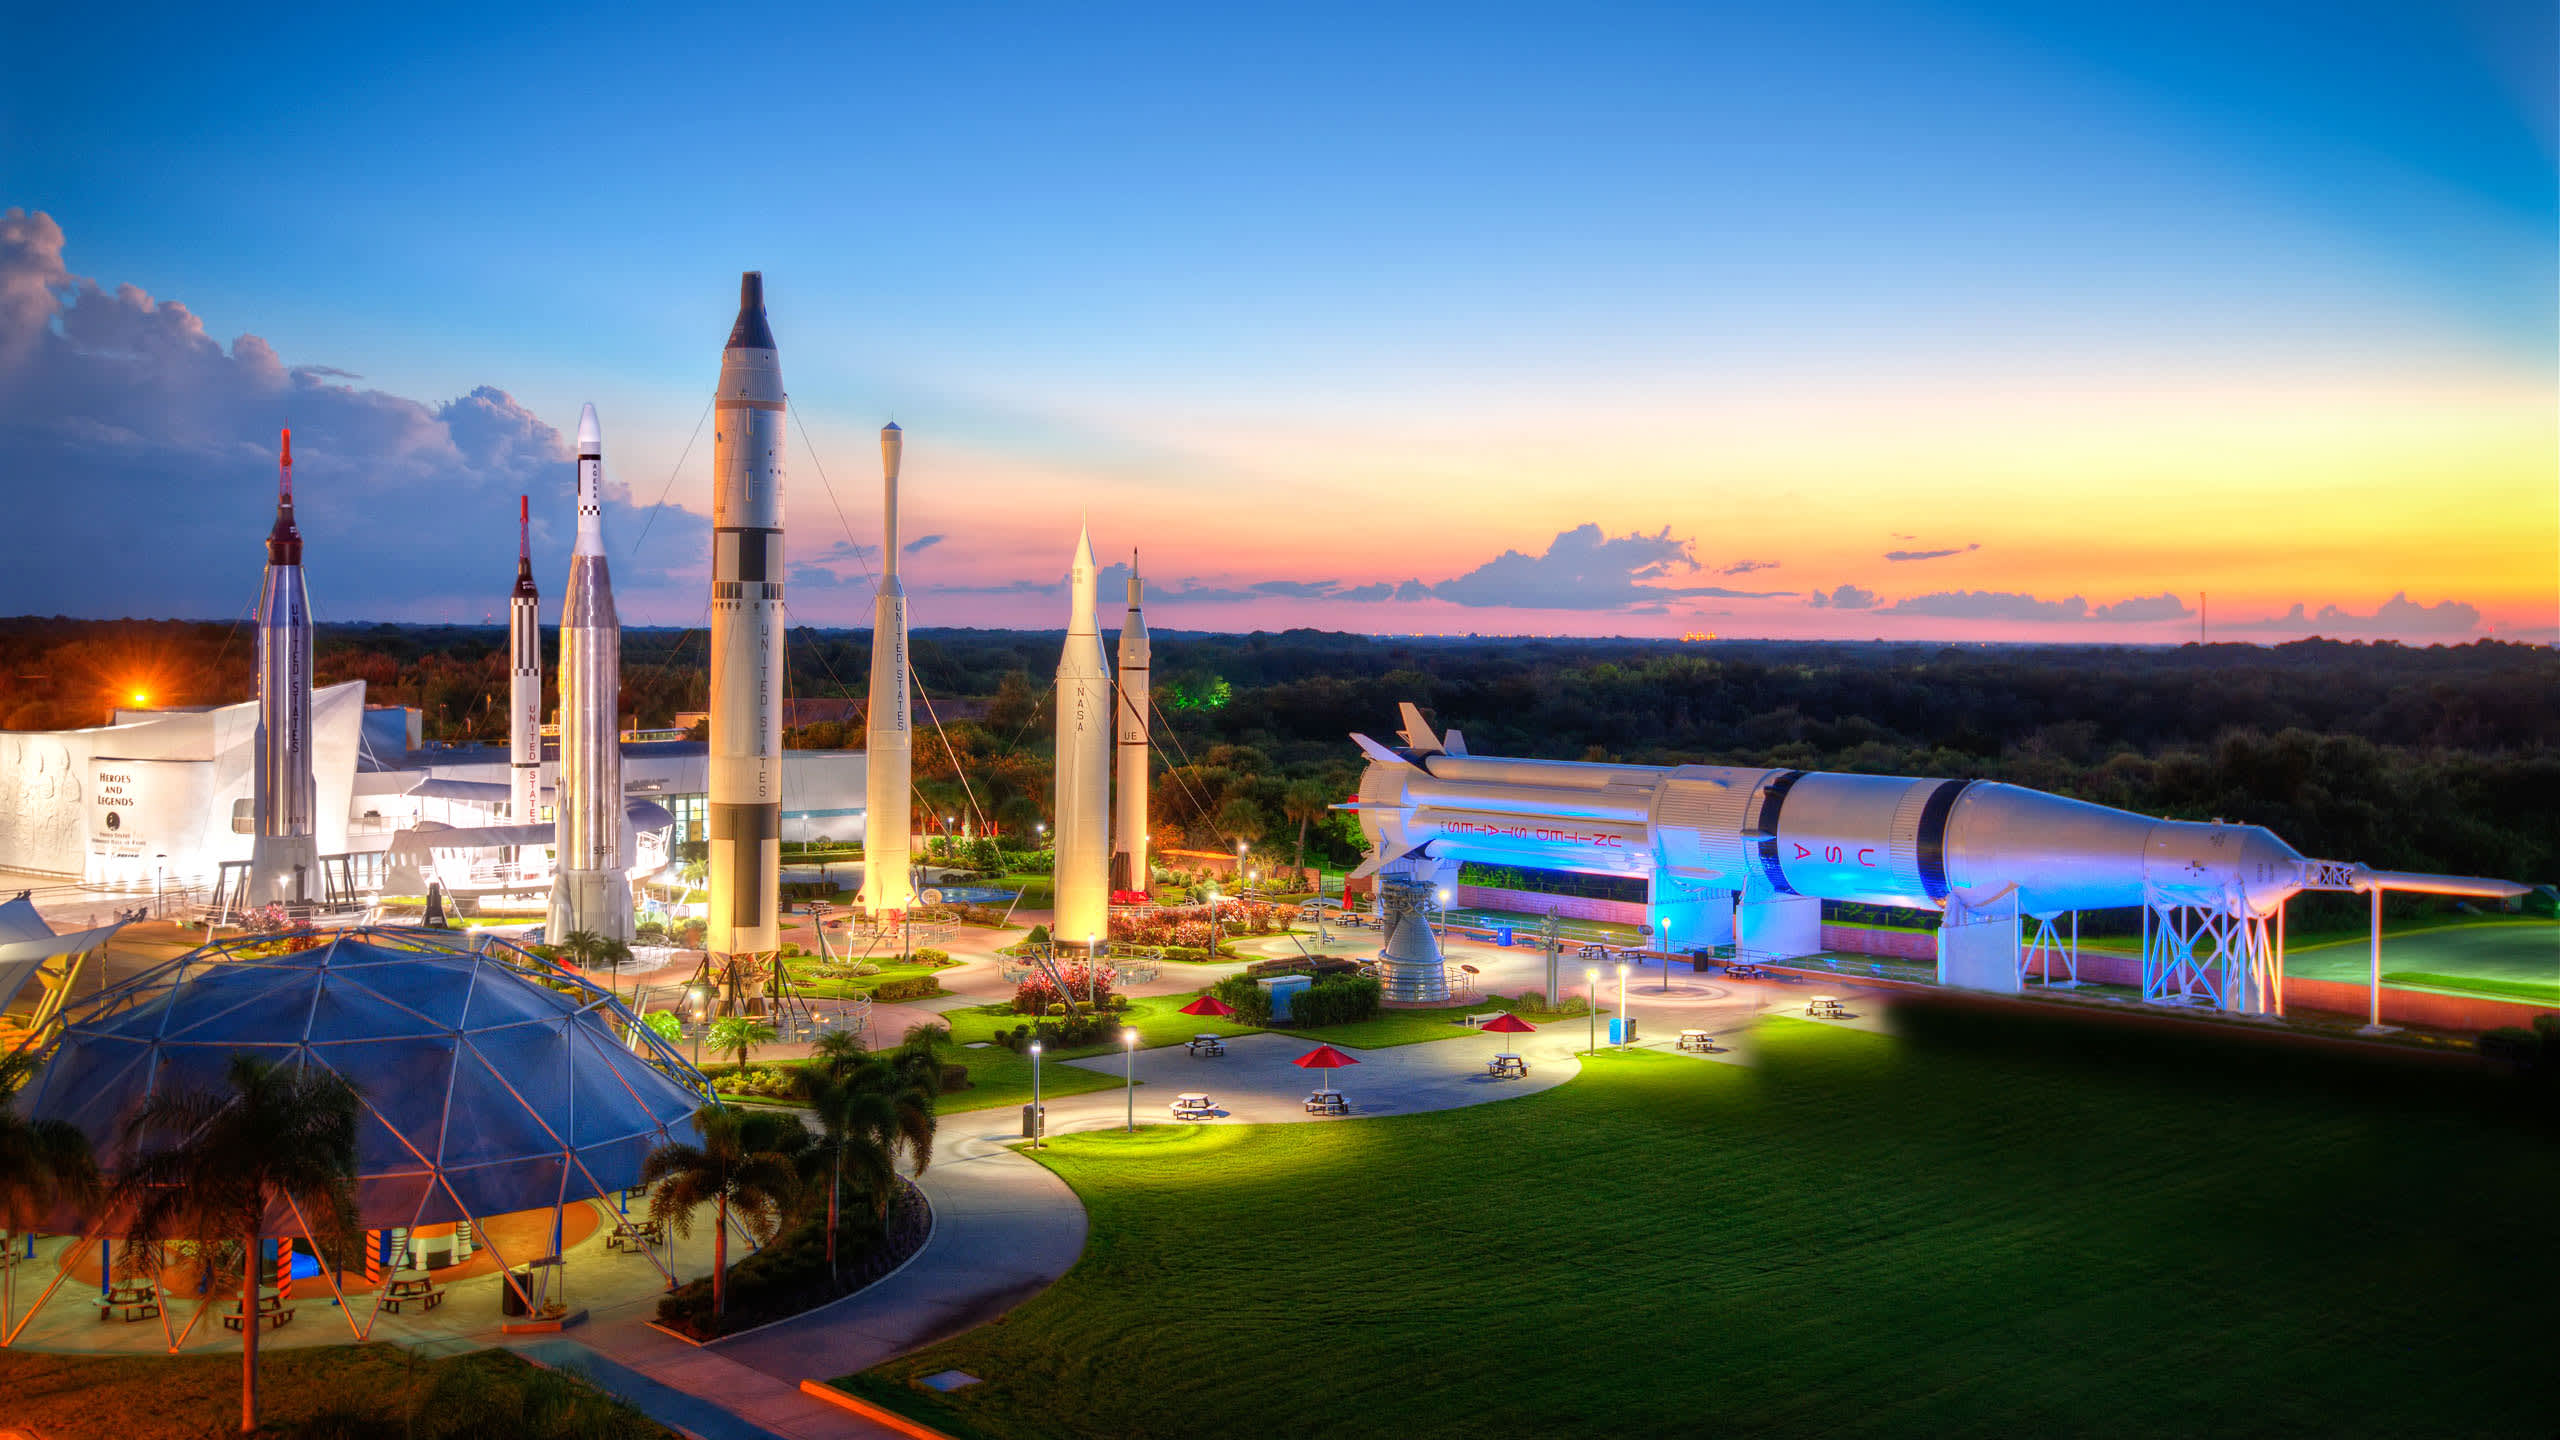 Kennedy Space Center's visitor complex offers outer space experience